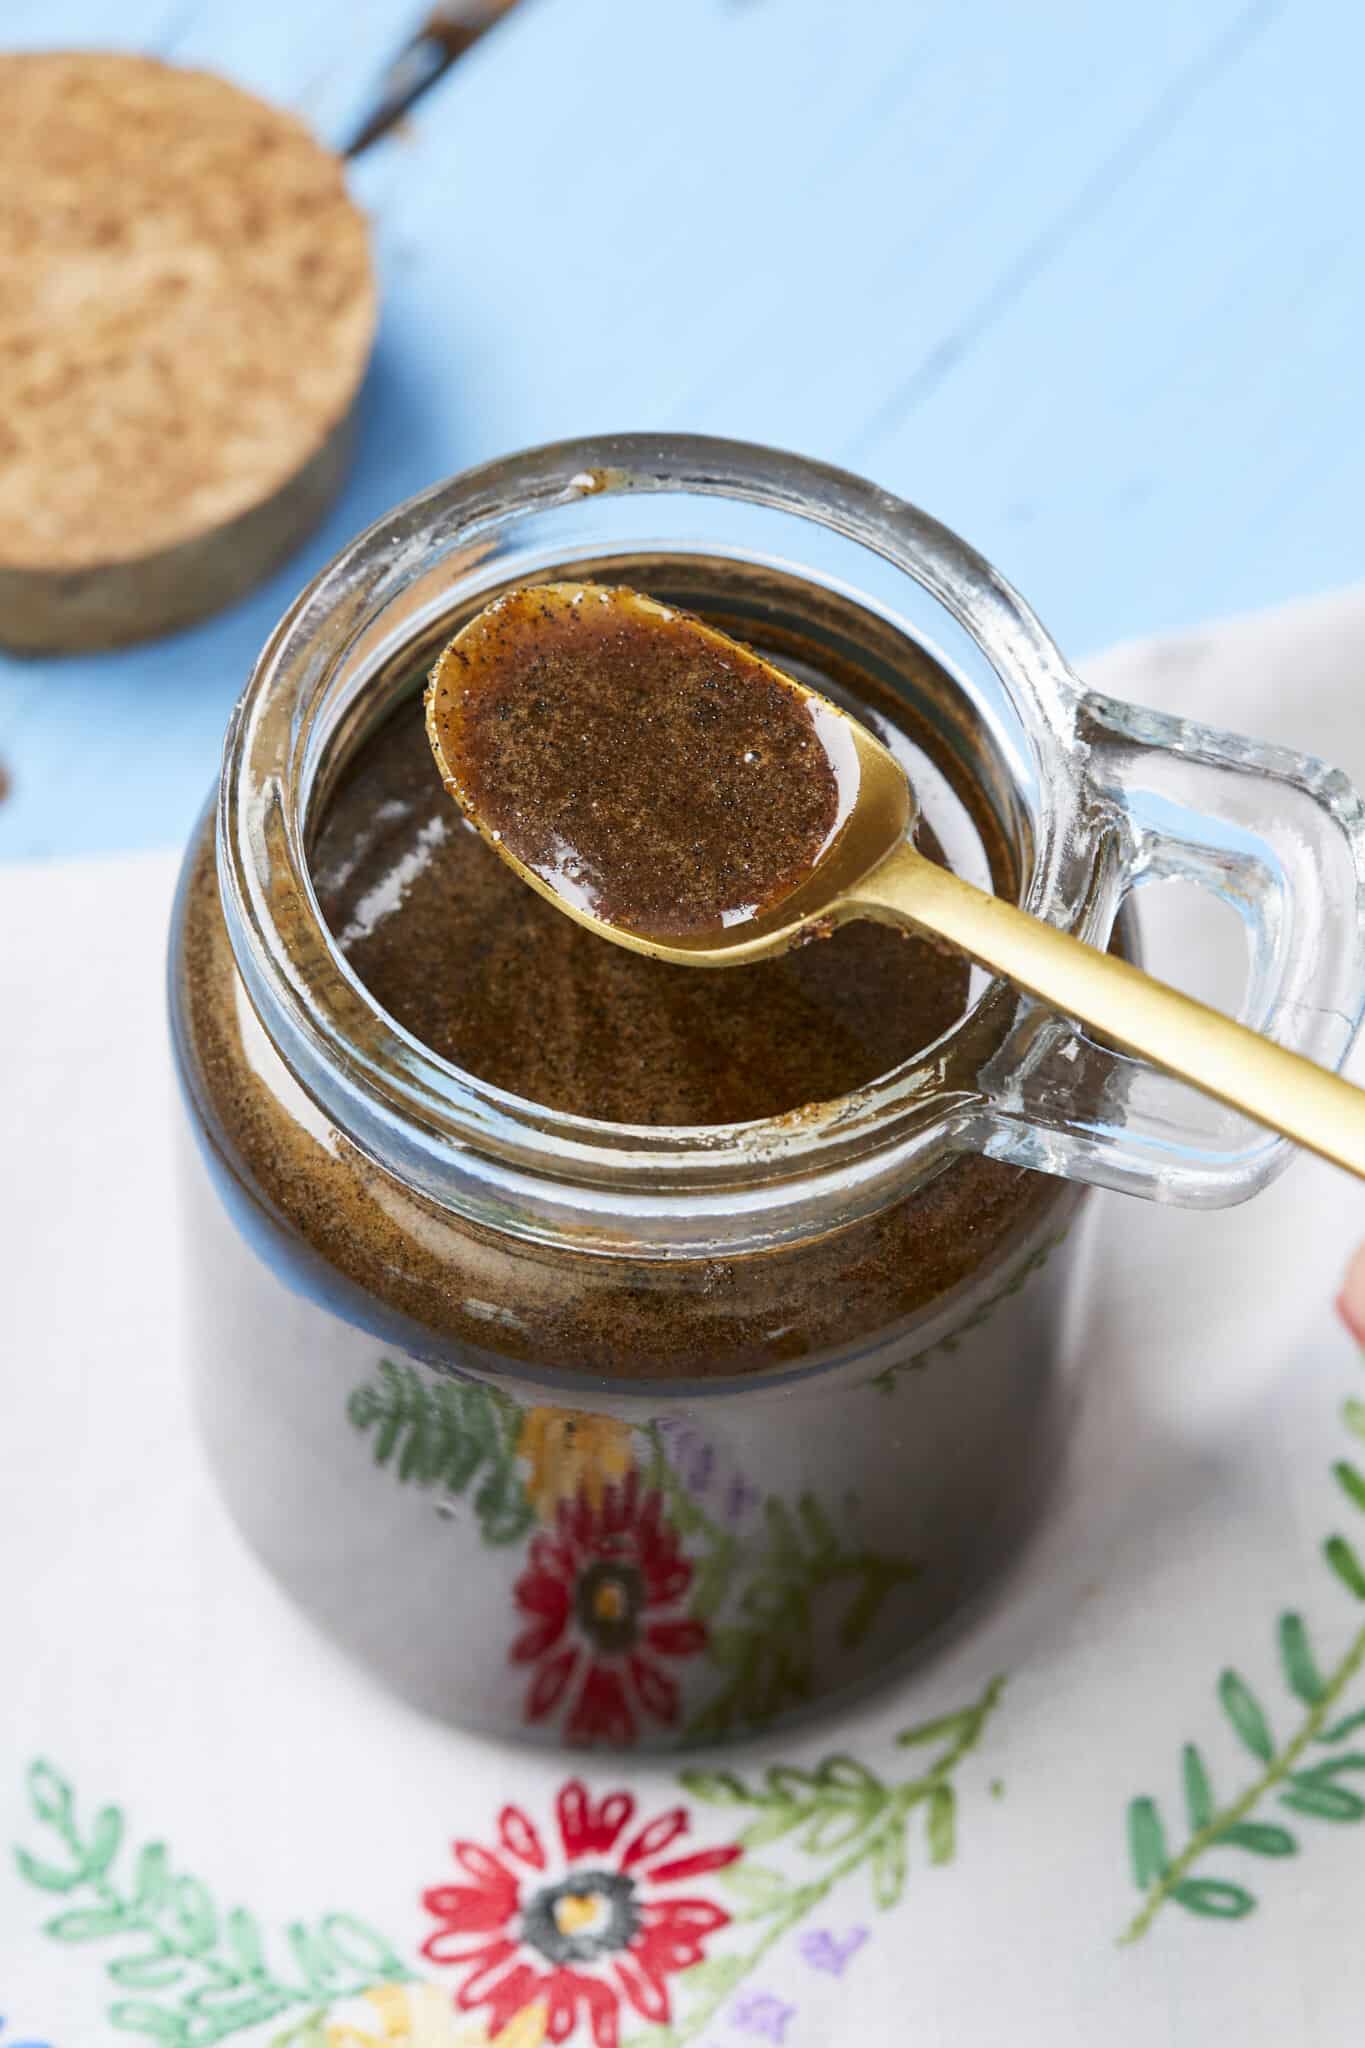 Vanilla bean paste is sotred in a glass jar with a golden colors spoon on top holding some paste to show the consistency and color. Vanilla Bean Paste has a thick and slightly viscous consistency. The vanilla bean seeds give it a speckled appearance, which can be visually appealing in recipes.